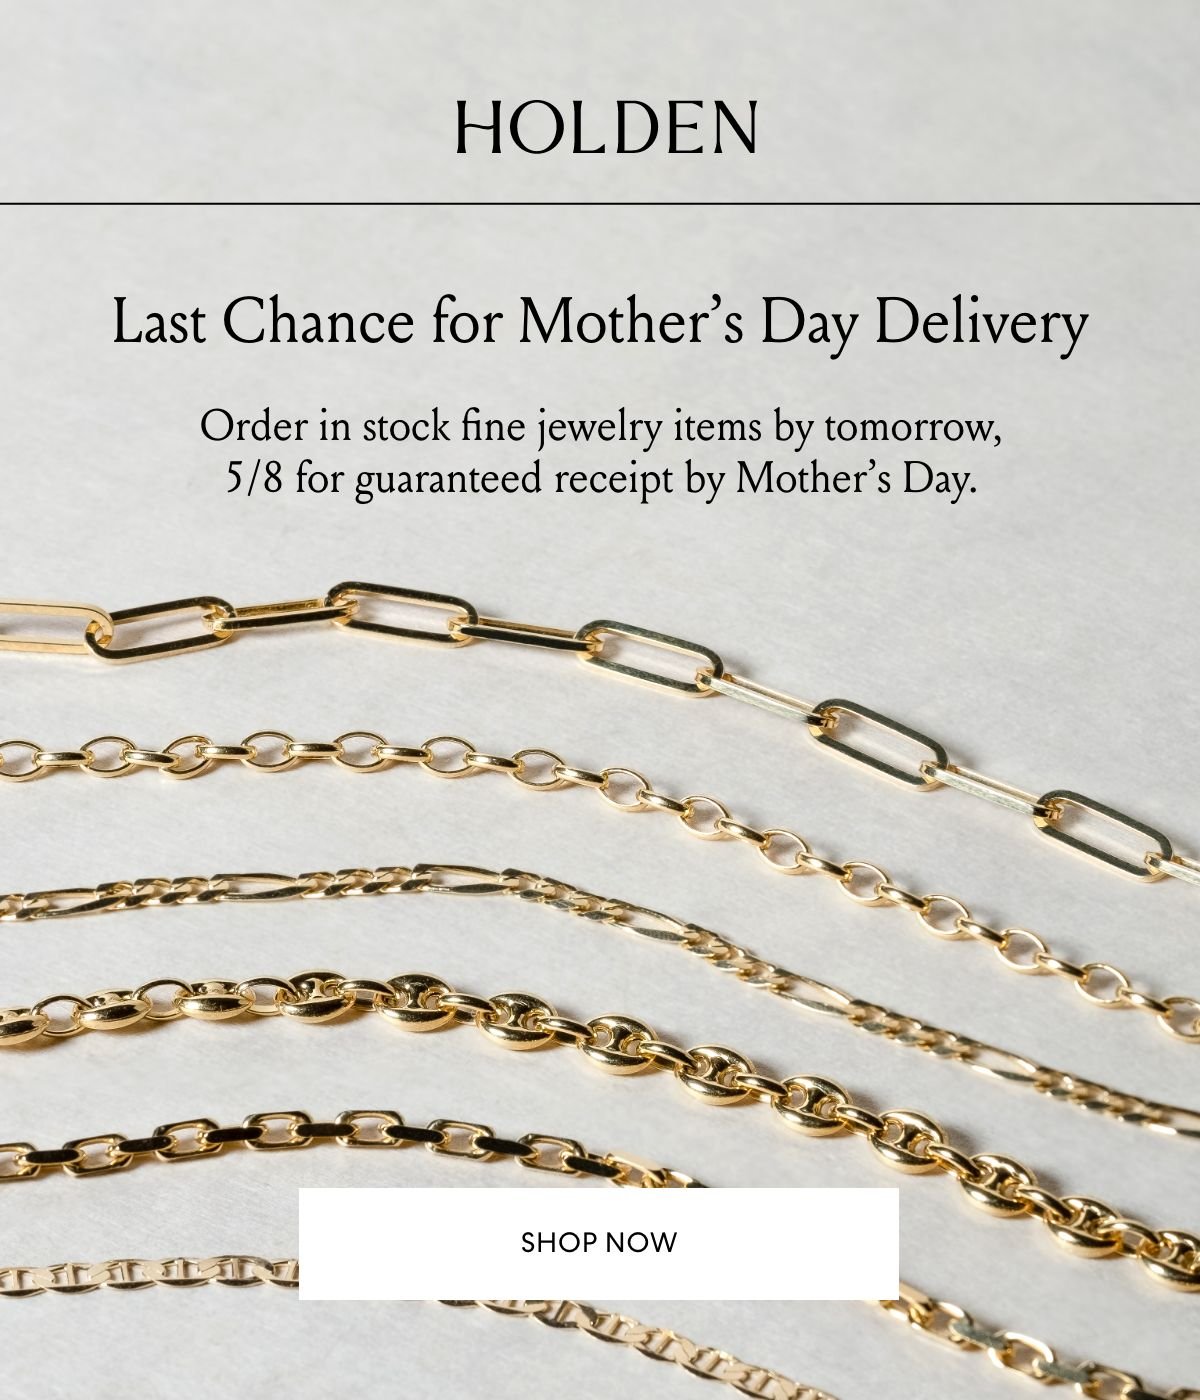 Last Chance for Mother's Day Delivery